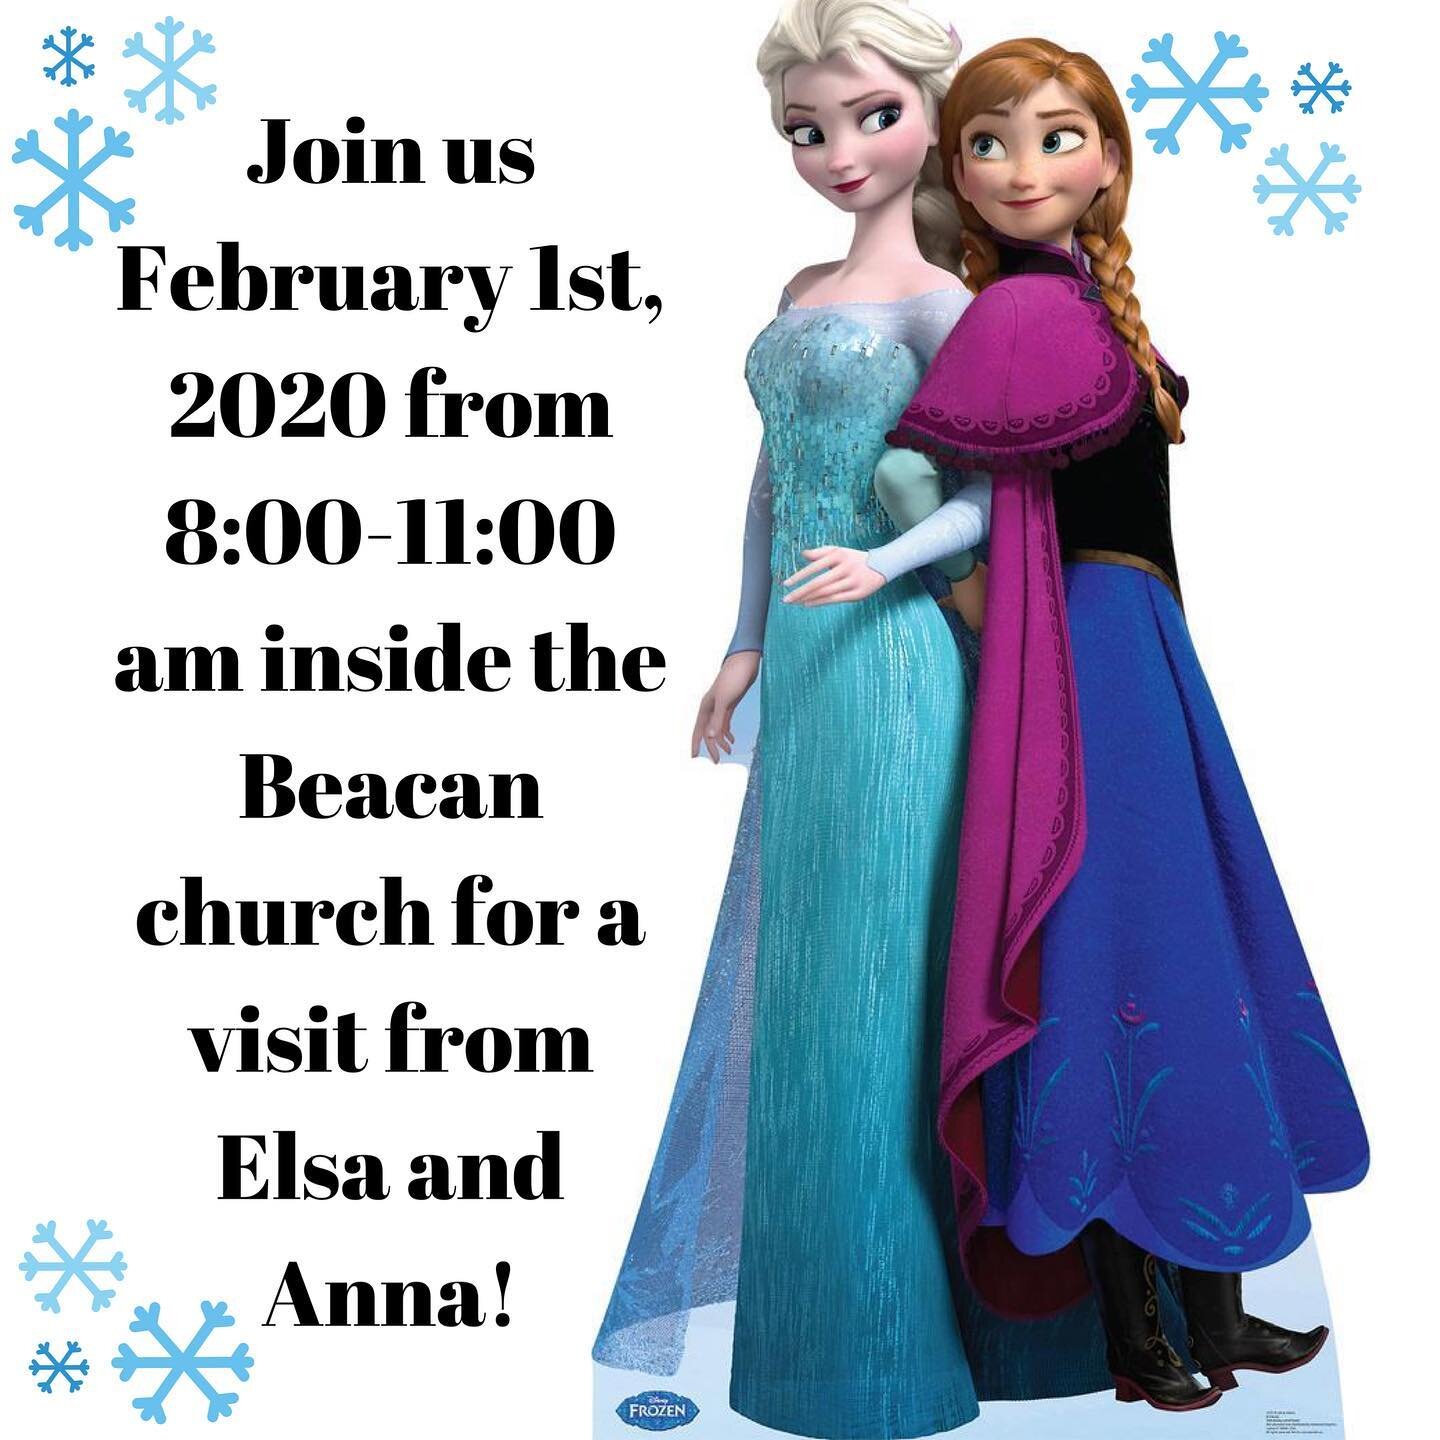 Just a reminder to all that Elsa and Anna will be coming to see everyone at our pancake breakfast on February 1st during the annual Lions Winter Carnival! We&rsquo;re so excited to see you all there! #beavertonlionswintercarnival